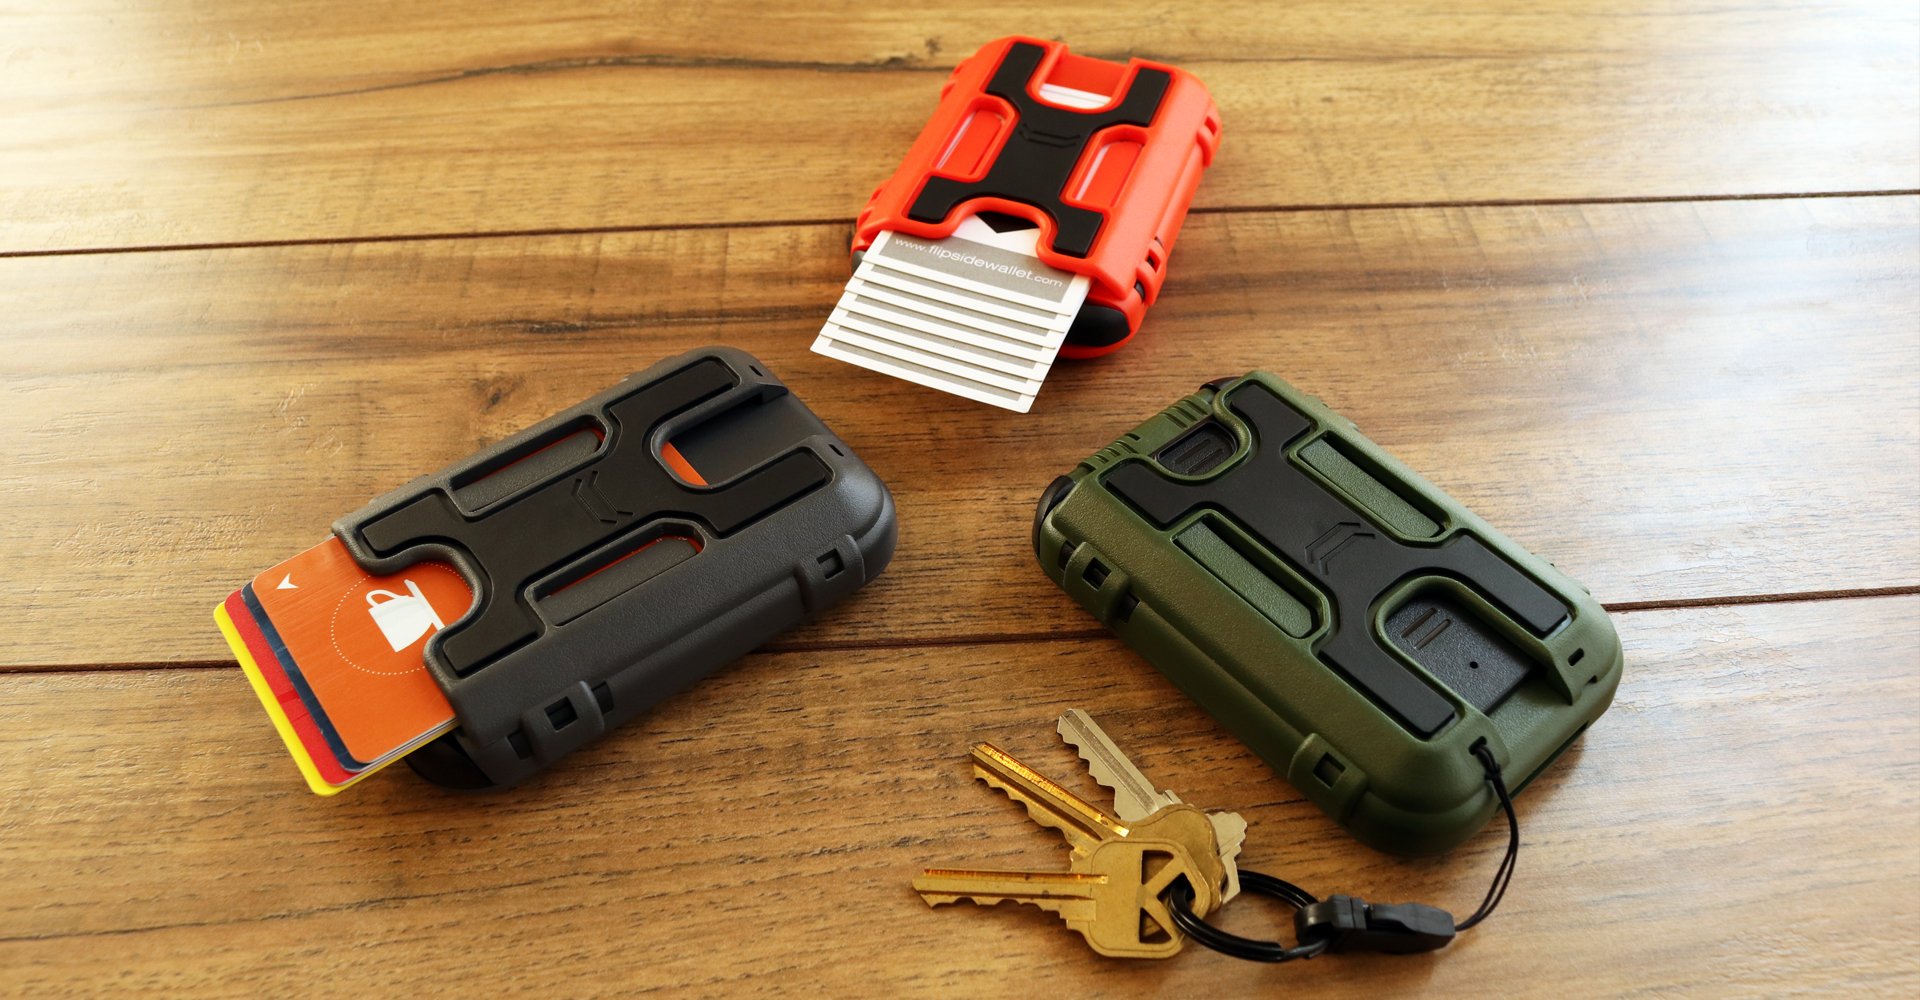 modular wallet attachments for your flipside wallet that increases its capacity